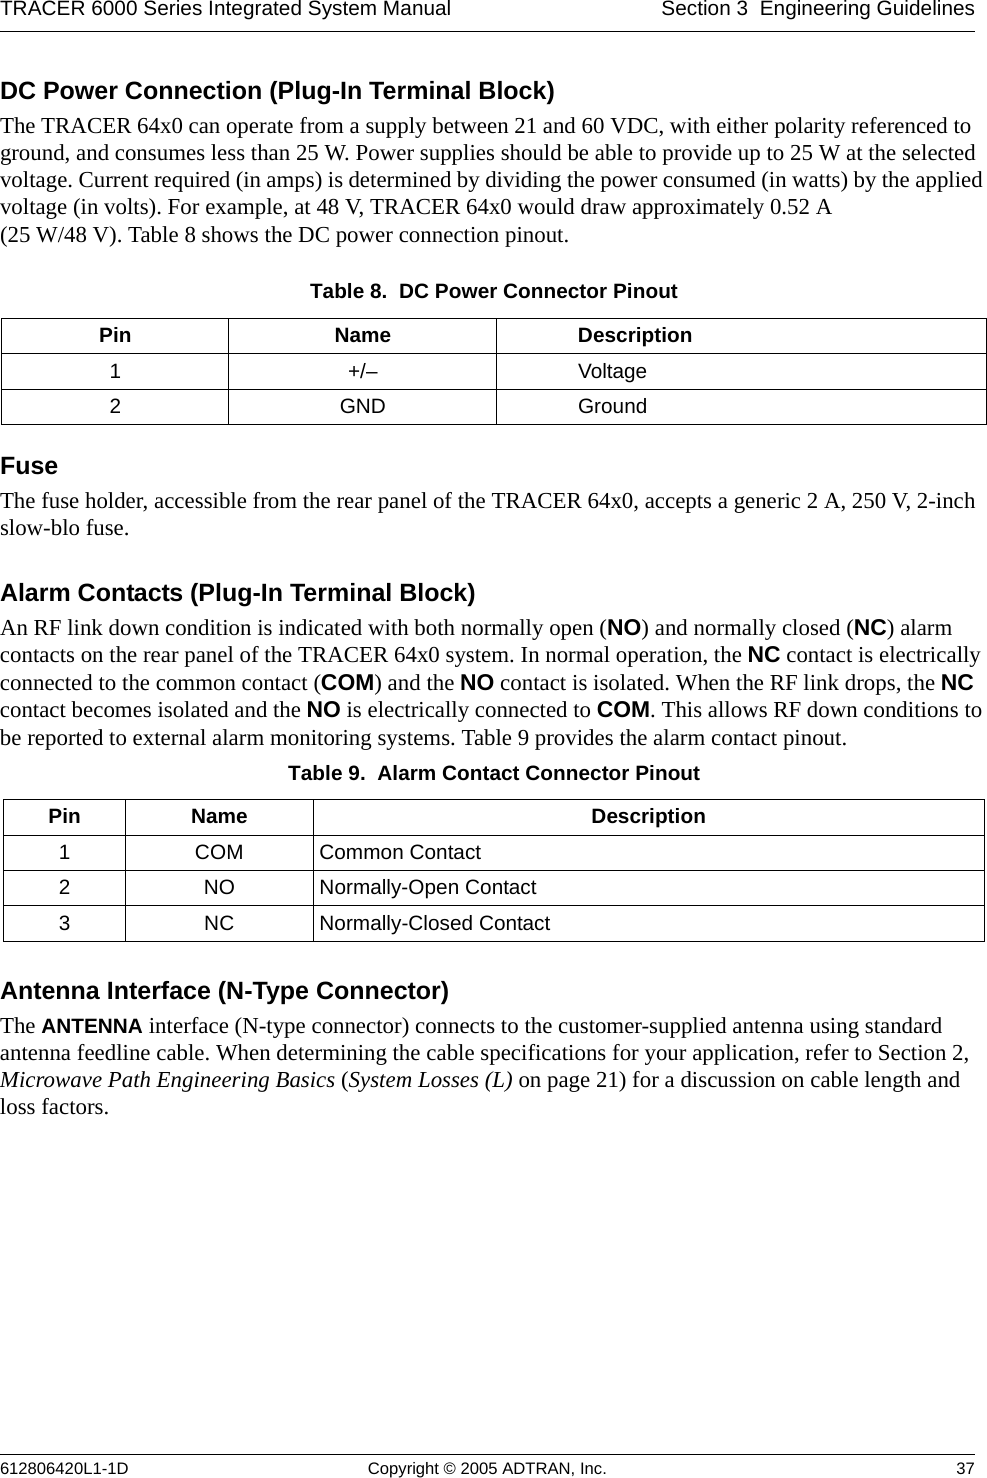 TRACER 6000 Series Integrated System Manual Section 3  Engineering Guidelines612806420L1-1D Copyright © 2005 ADTRAN, Inc. 37DC Power Connection (Plug-In Terminal Block)The TRACER 64x0 can operate from a supply between 21 and 60 VDC, with either polarity referenced to ground, and consumes less than 25 W. Power supplies should be able to provide up to 25 W at the selected voltage. Current required (in amps) is determined by dividing the power consumed (in watts) by the applied voltage (in volts). For example, at 48 V, TRACER 64x0 would draw approximately 0.52 A  (25 W/48 V). Table 8 shows the DC power connection pinout.FuseThe fuse holder, accessible from the rear panel of the TRACER 64x0, accepts a generic 2 A, 250 V, 2-inch slow-blo fuse.Alarm Contacts (Plug-In Terminal Block)An RF link down condition is indicated with both normally open (NO) and normally closed (NC) alarm contacts on the rear panel of the TRACER 64x0 system. In normal operation, the NC contact is electrically connected to the common contact (COM) and the NO contact is isolated. When the RF link drops, the NC contact becomes isolated and the NO is electrically connected to COM. This allows RF down conditions to be reported to external alarm monitoring systems. Table 9 provides the alarm contact pinout.Antenna Interface (N-Type Connector)The ANTENNA interface (N-type connector) connects to the customer-supplied antenna using standard antenna feedline cable. When determining the cable specifications for your application, refer to Section 2, Microwave Path Engineering Basics (System Losses (L) on page 21) for a discussion on cable length and loss factors.Table 8.  DC Power Connector Pinout Pin Name Description1+/– Voltage2GND GroundTable 9.  Alarm Contact Connector Pinout Pin Name Description1 COM Common Contact2 NO Normally-Open Contact3 NC Normally-Closed Contact